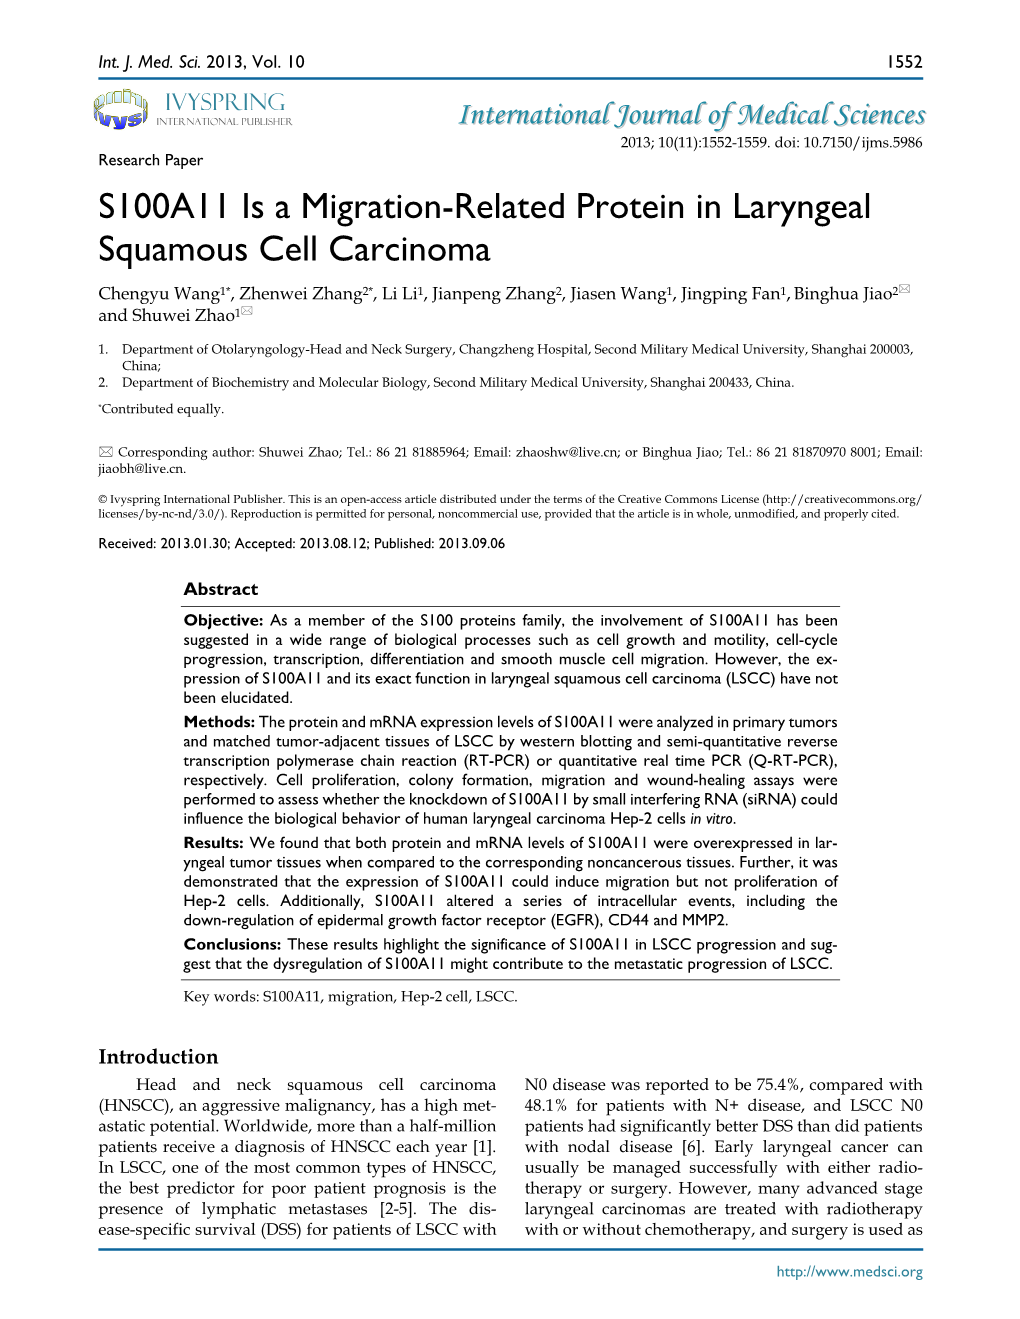 S100A11 Is a Migration-Related Protein in Laryngeal Squamous Cell Carcinoma